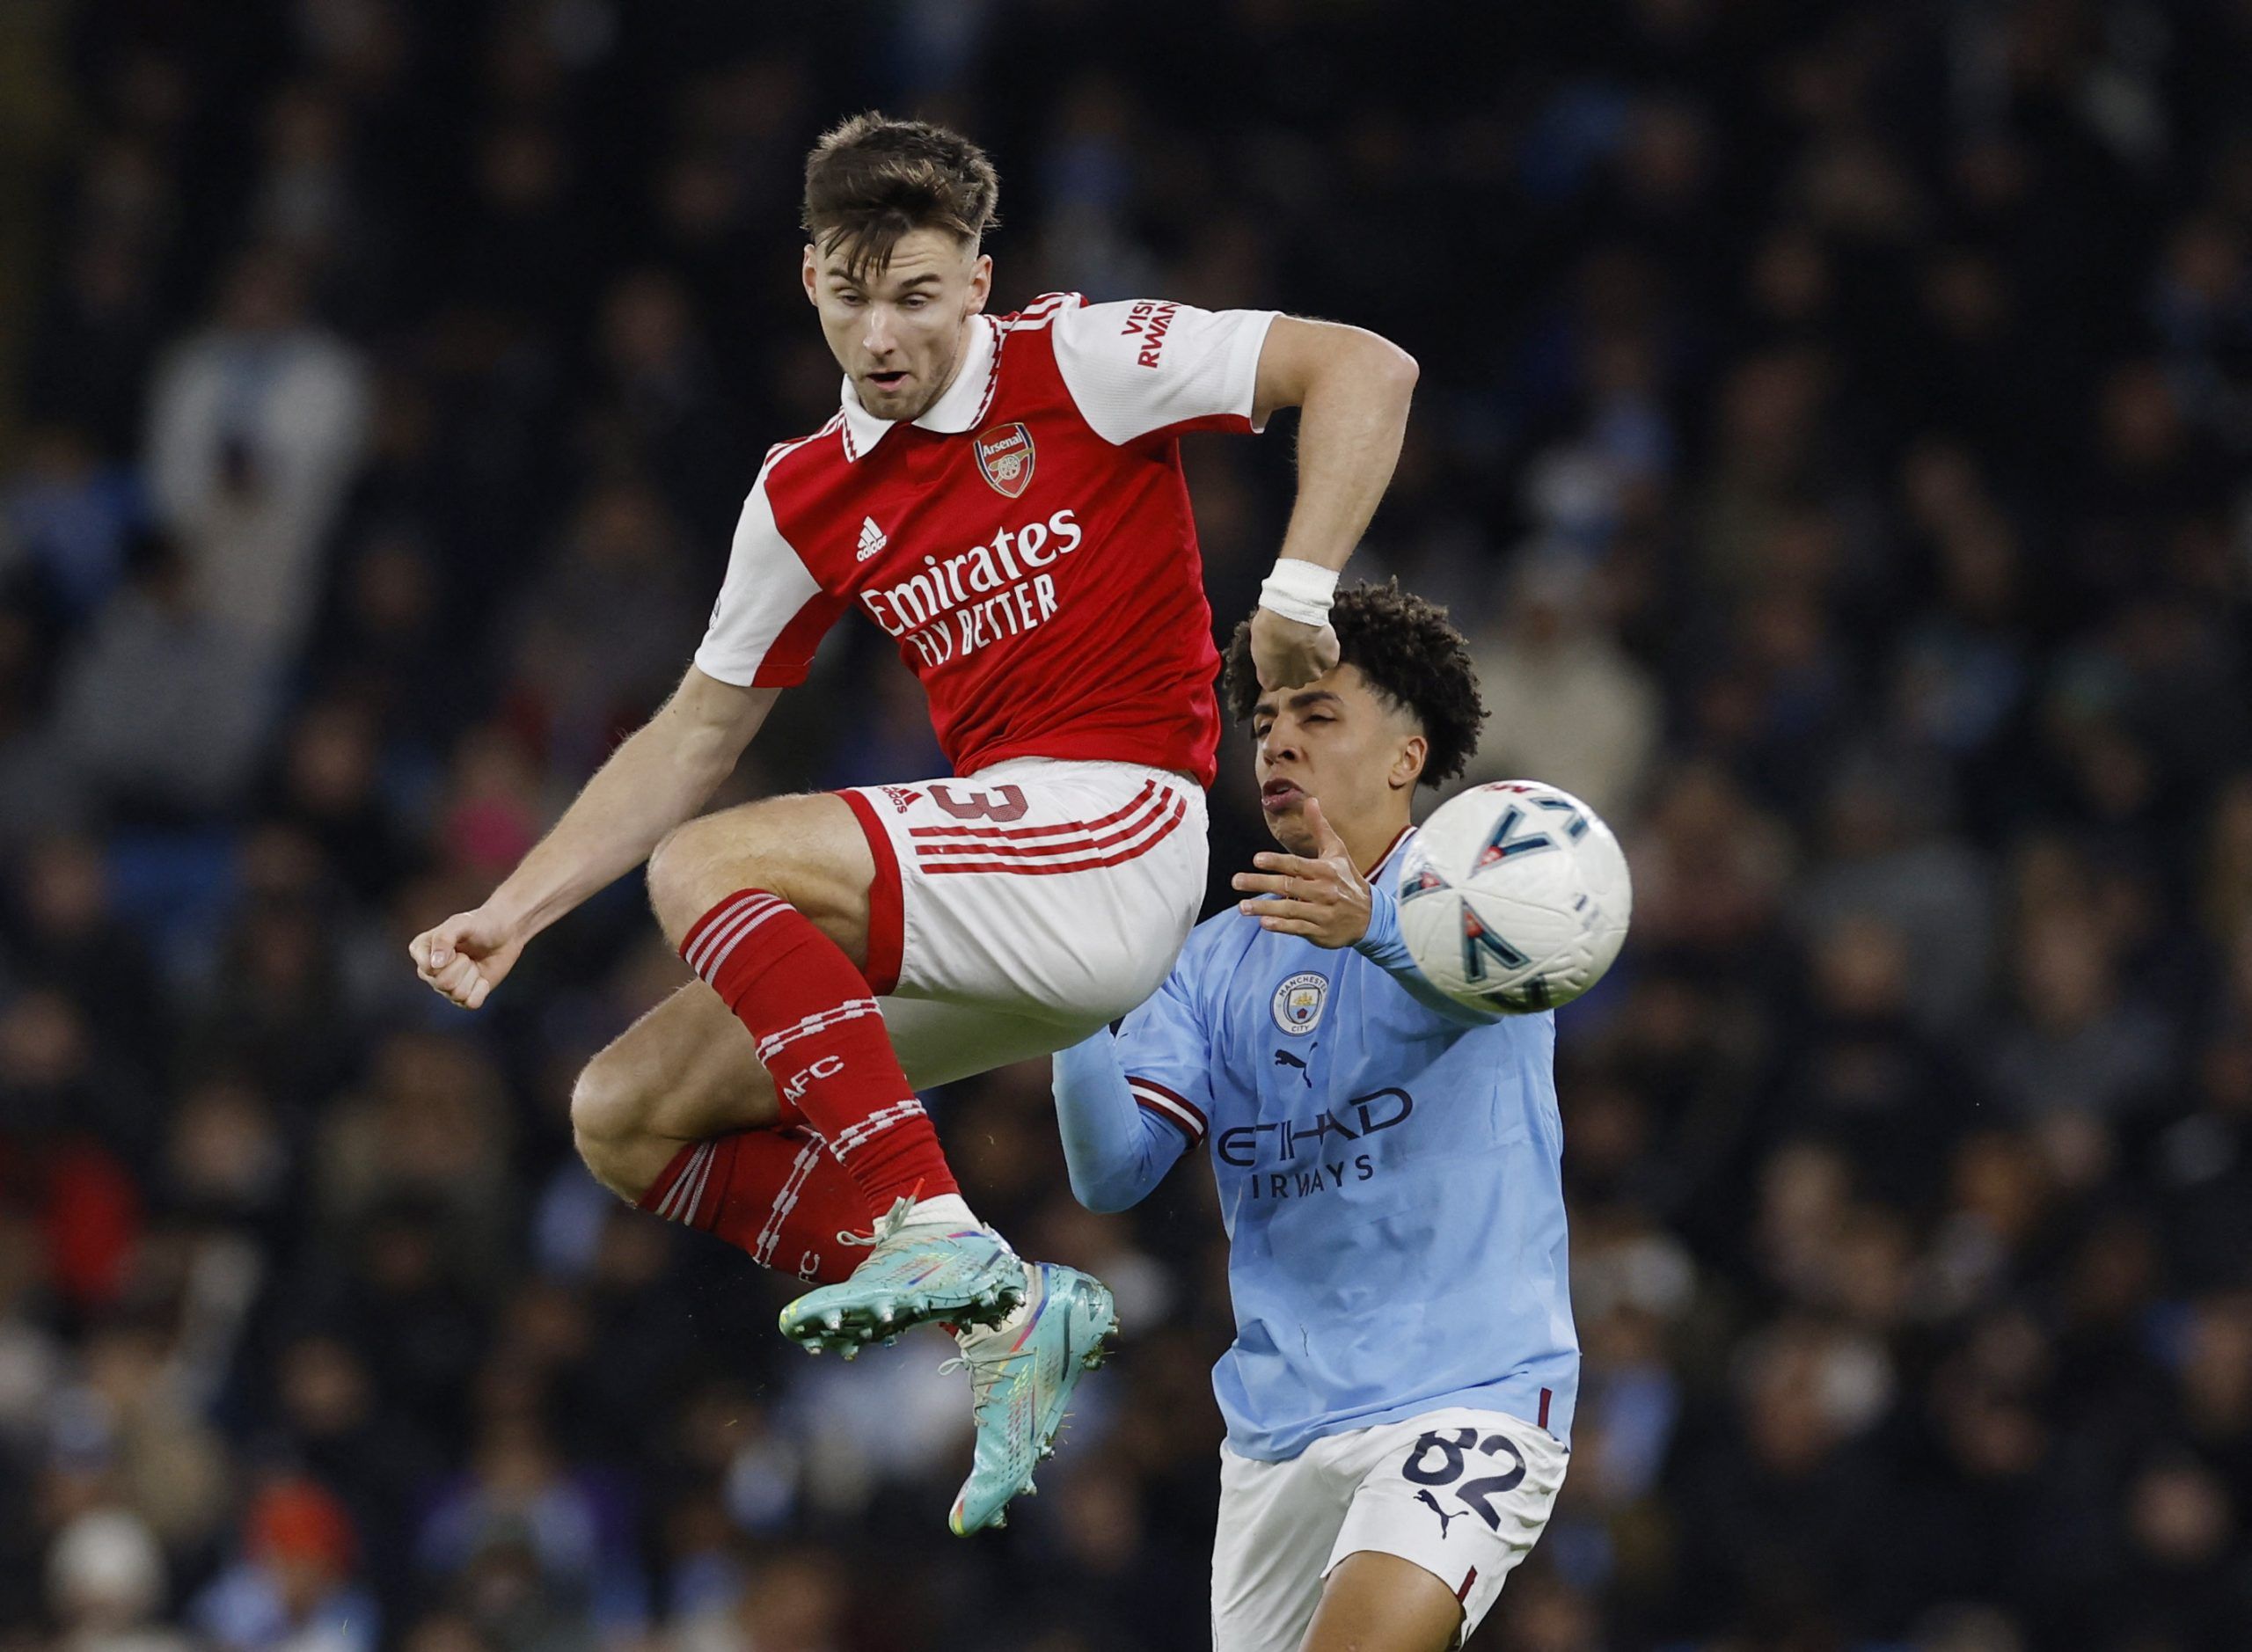 Soccer Football - FA Cup - Fourth Round - Manchester City v Arsenal - Etihad Stadium, Manchester, Britain - January 27, 2023 Arsenal's Kieran Tierney in action with Manchester City's Rico Lewis Action Images via Reuters/Jason Cairnduff